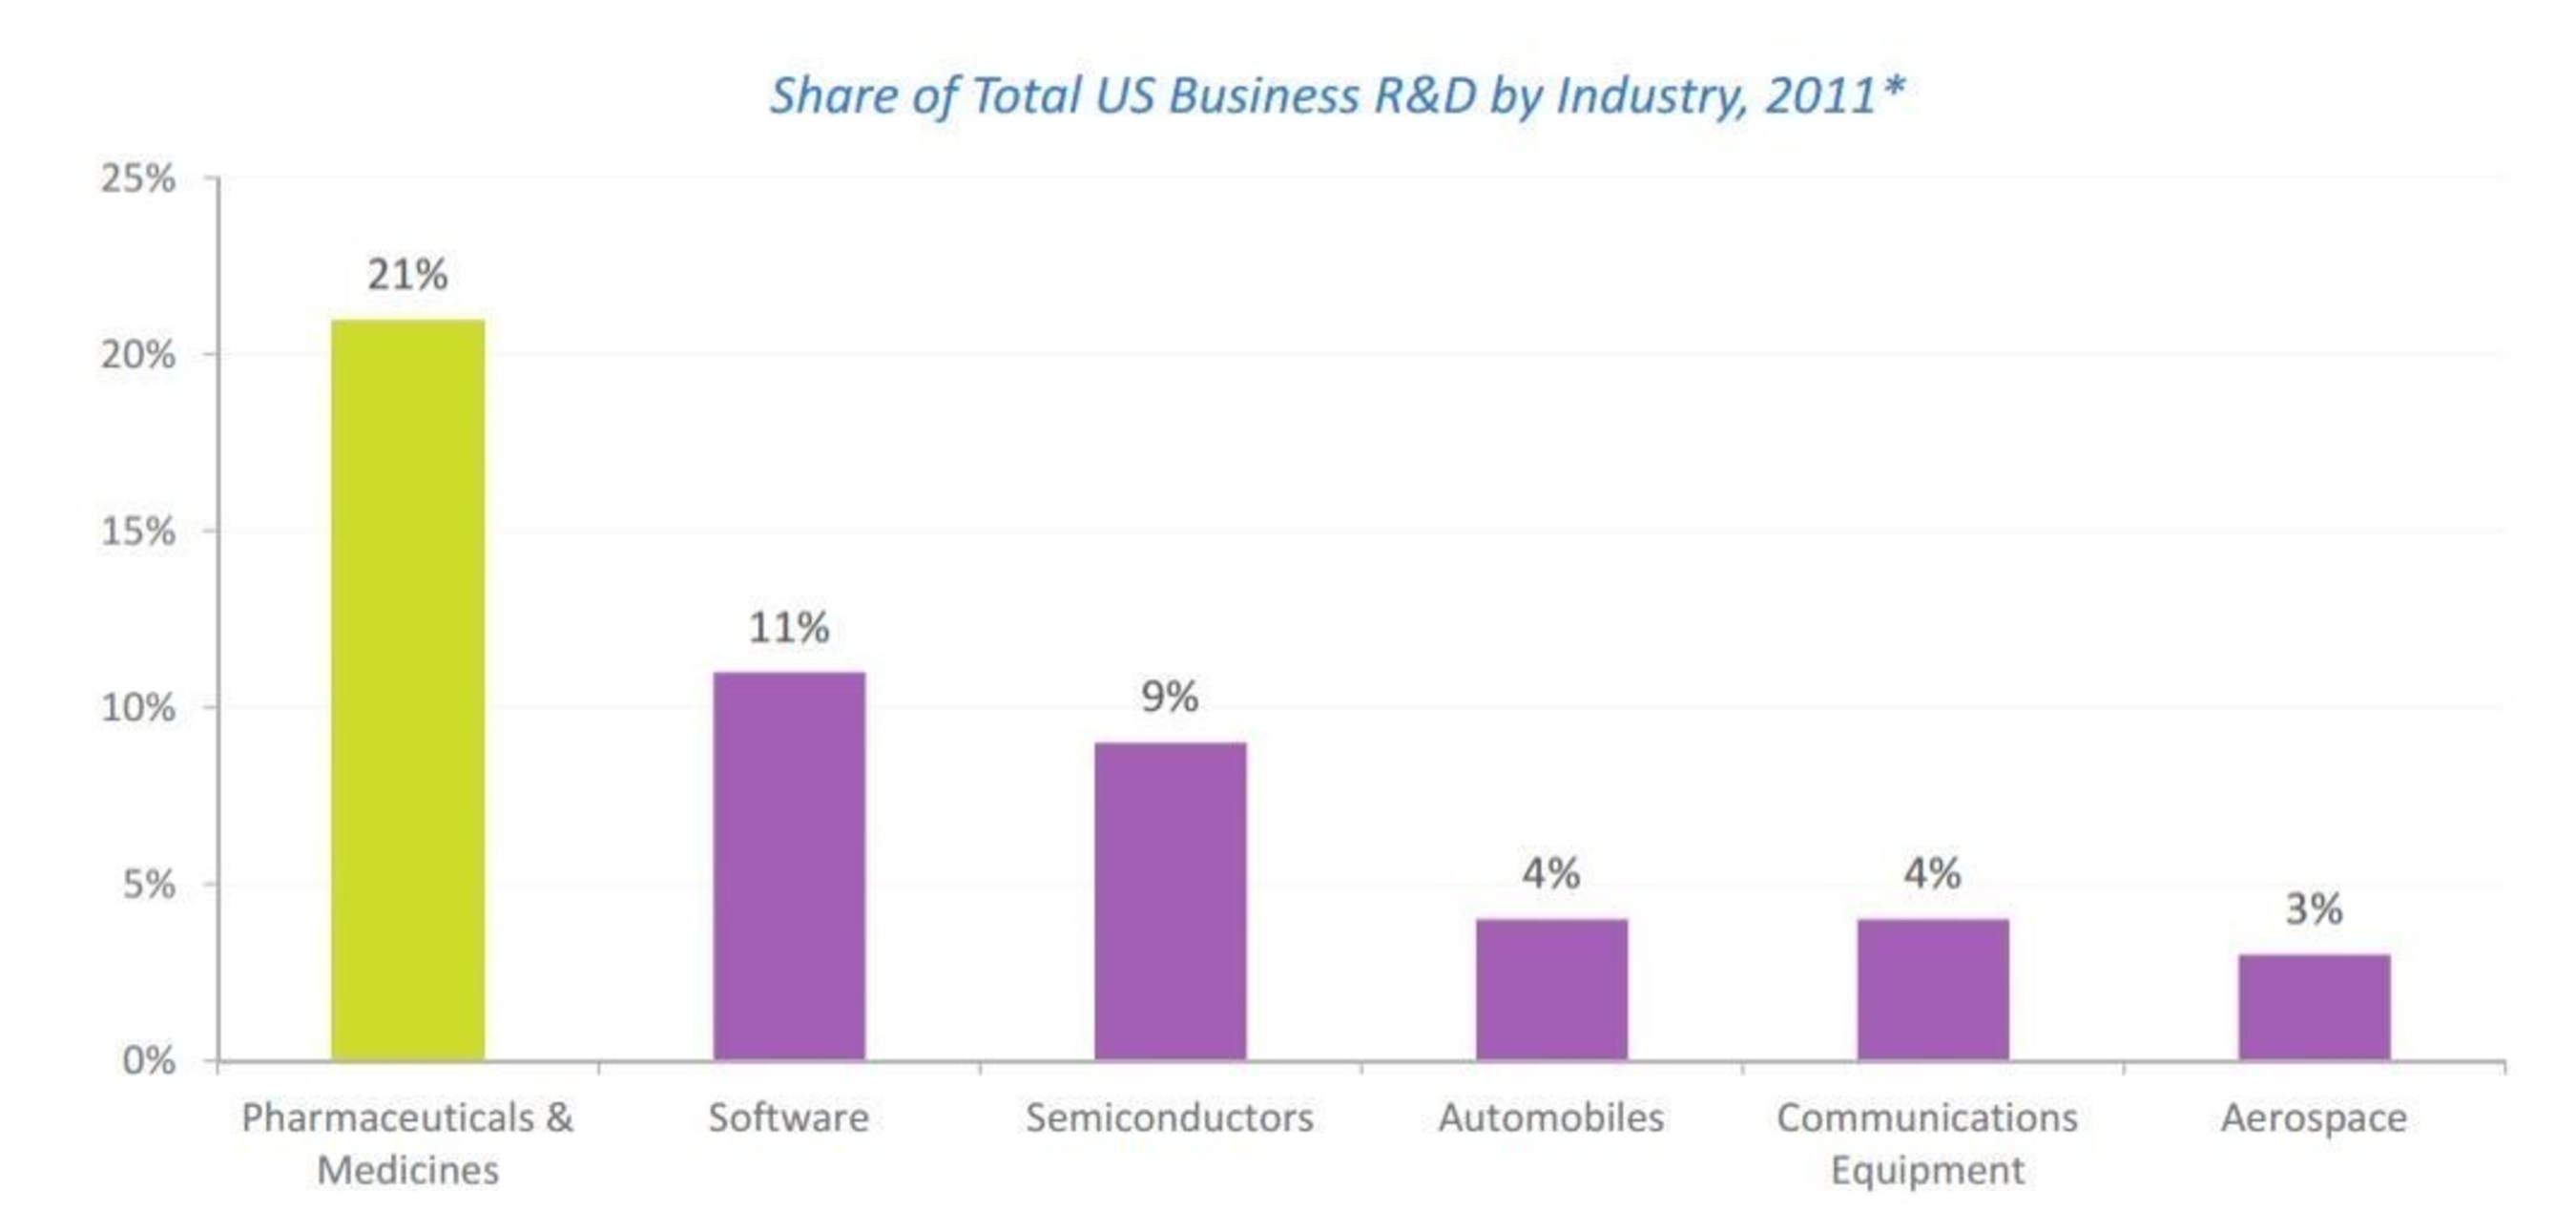 Share of Total US Business R&D by Industry, 2011.